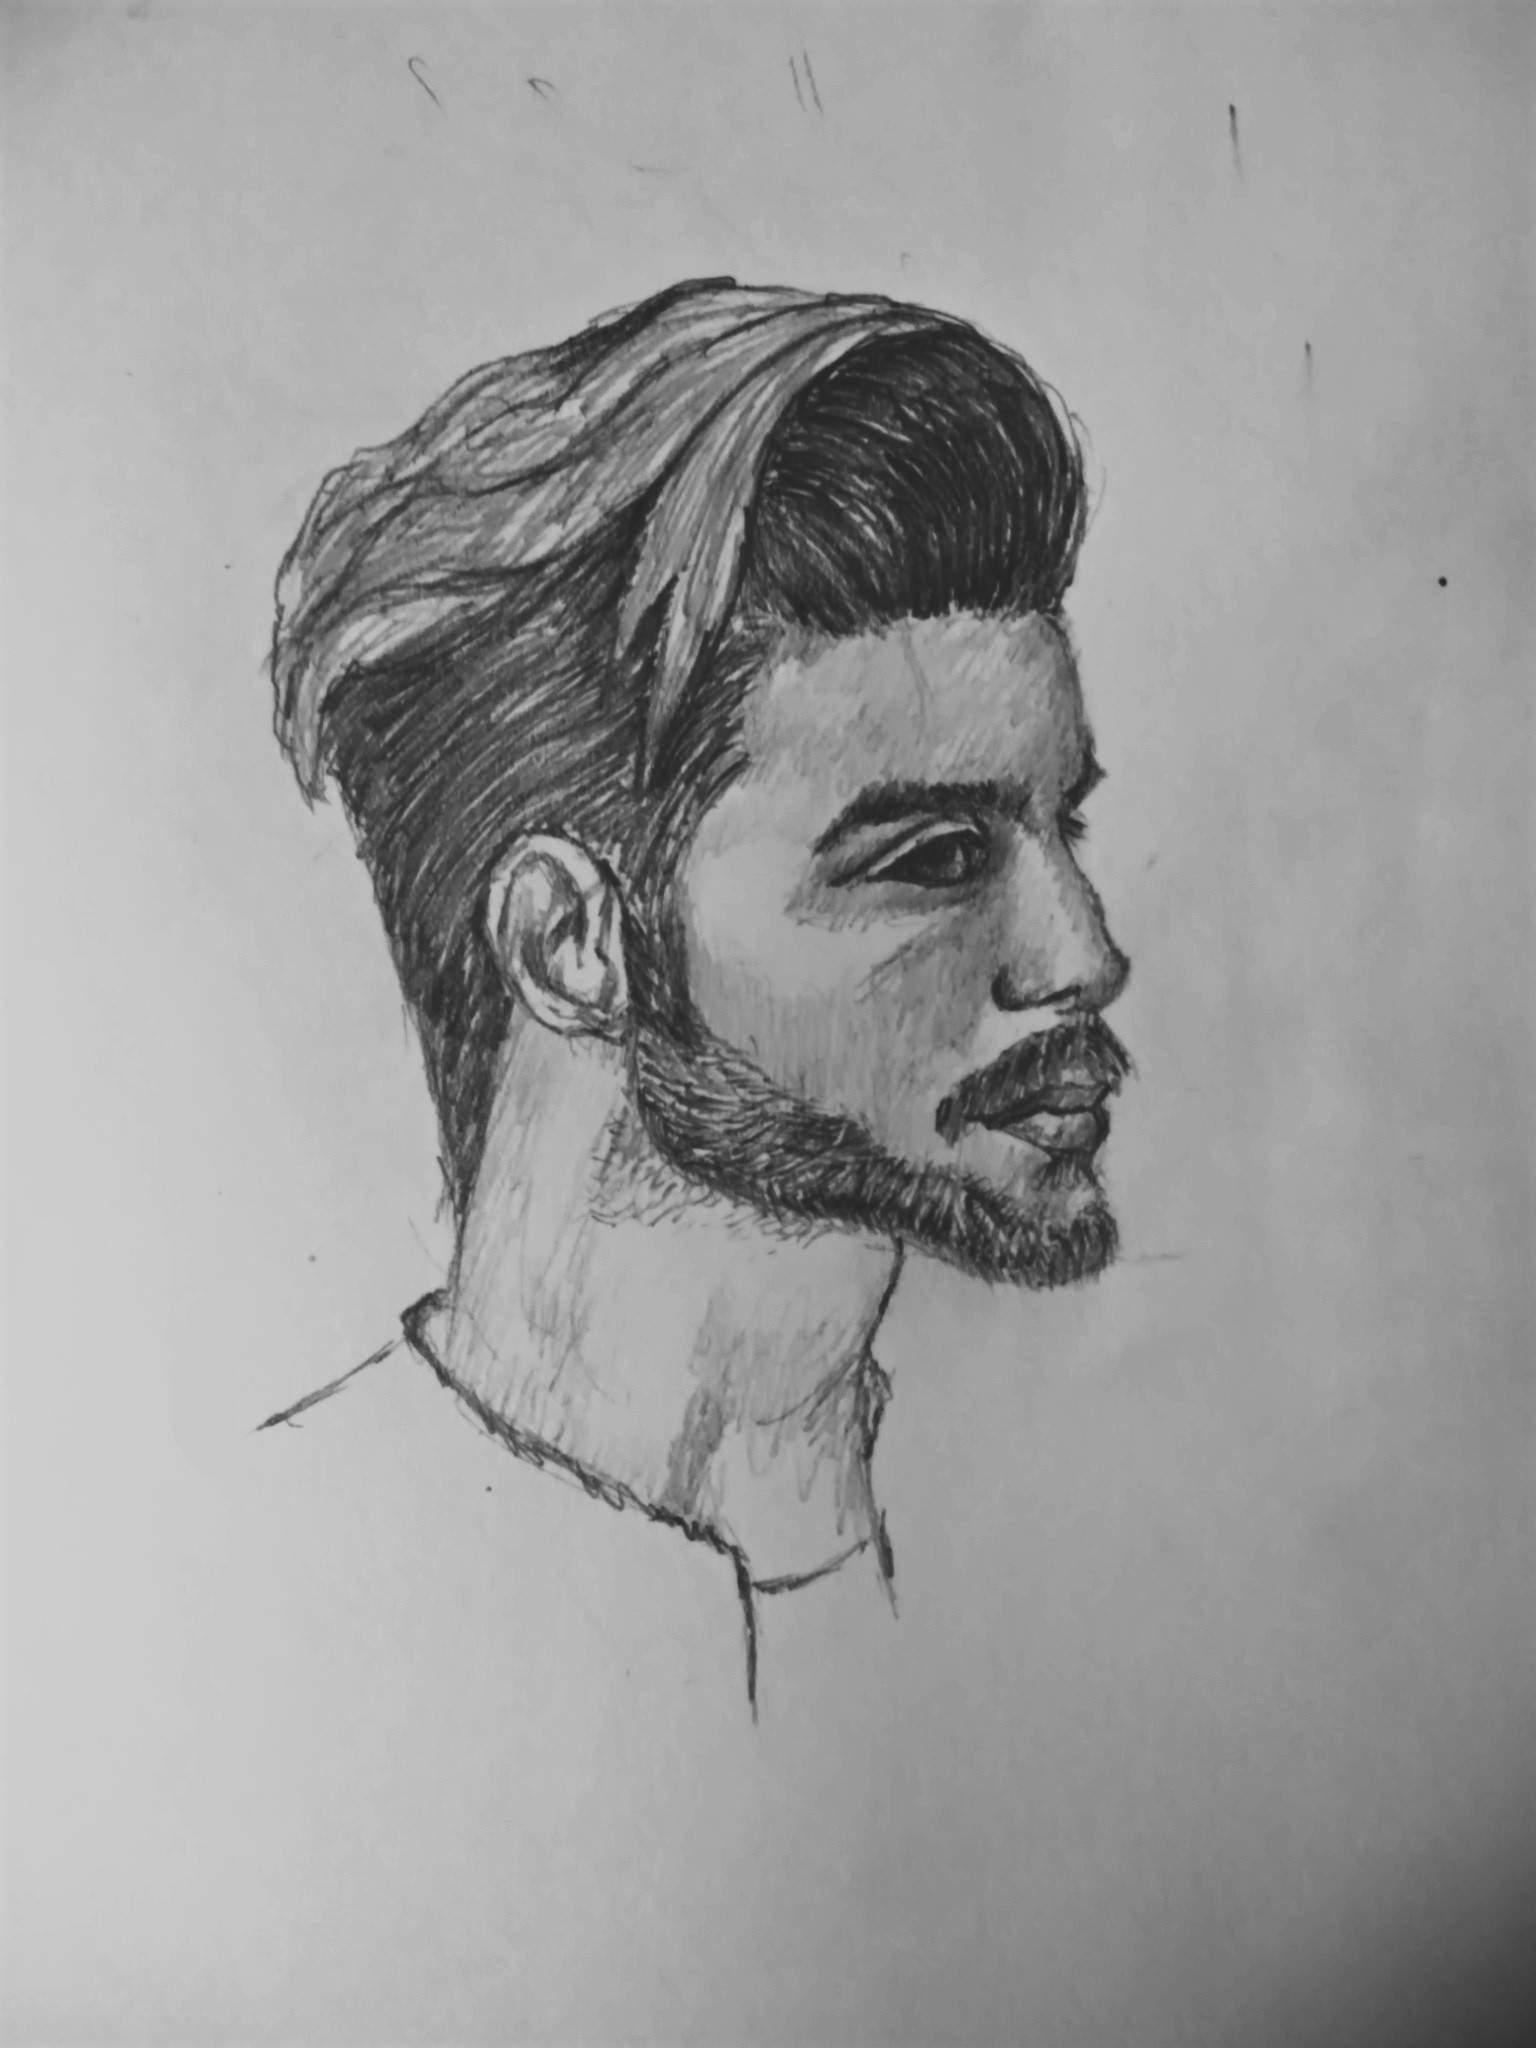 Male Face Pencil Sketch With Beard And Mustache Simple And New Zealand |  lupon.gov.ph